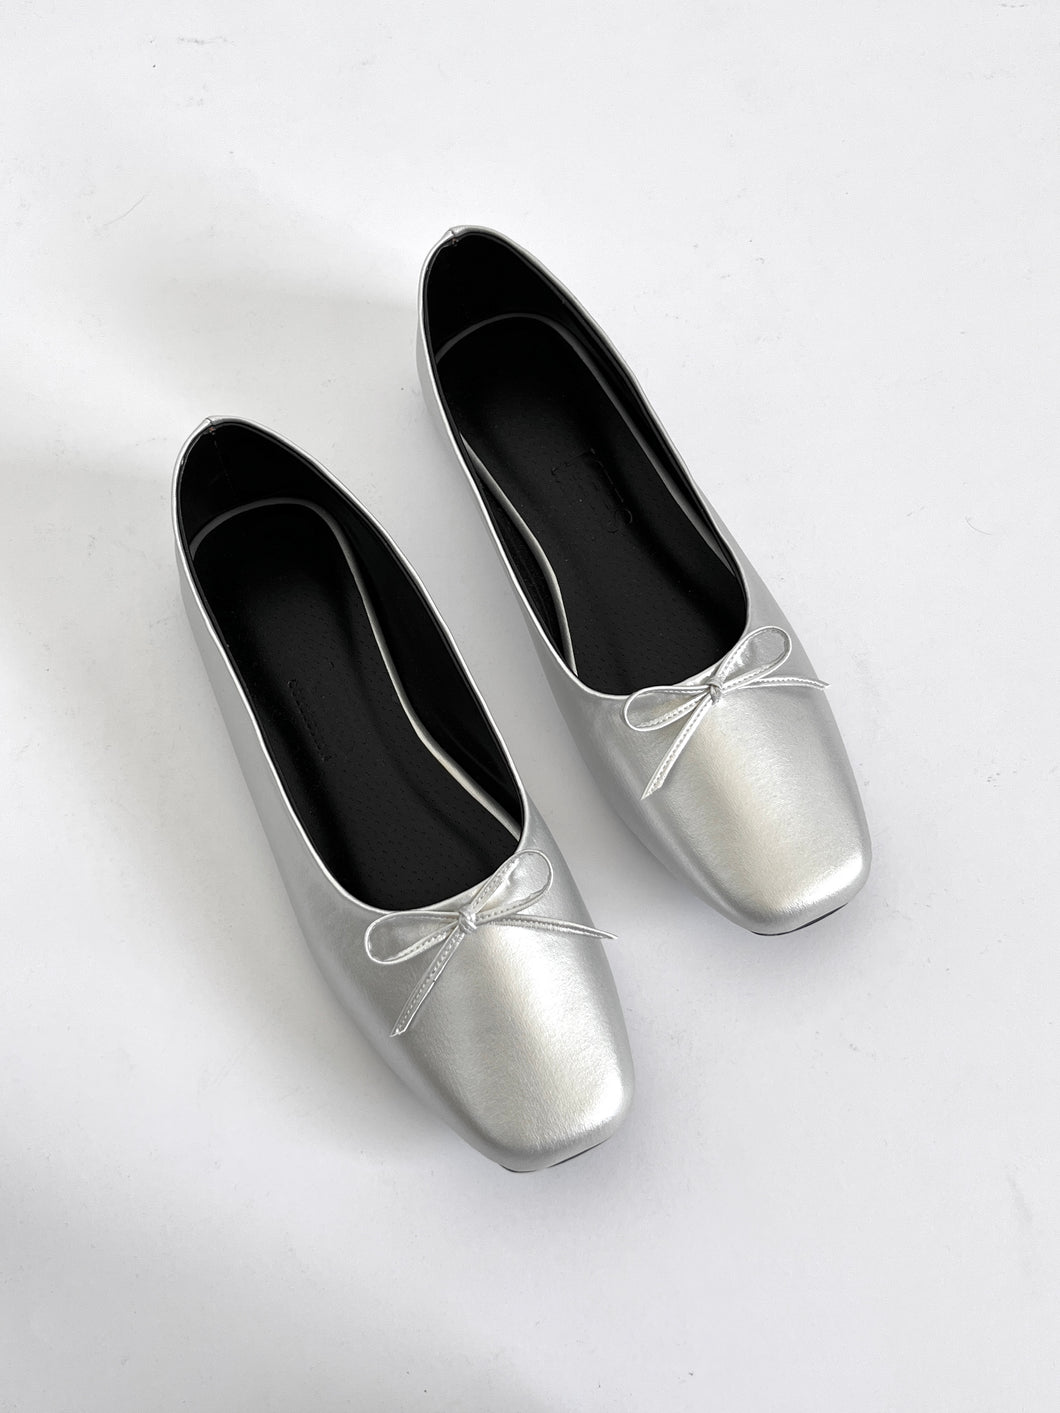 The Tali Shoes Silver